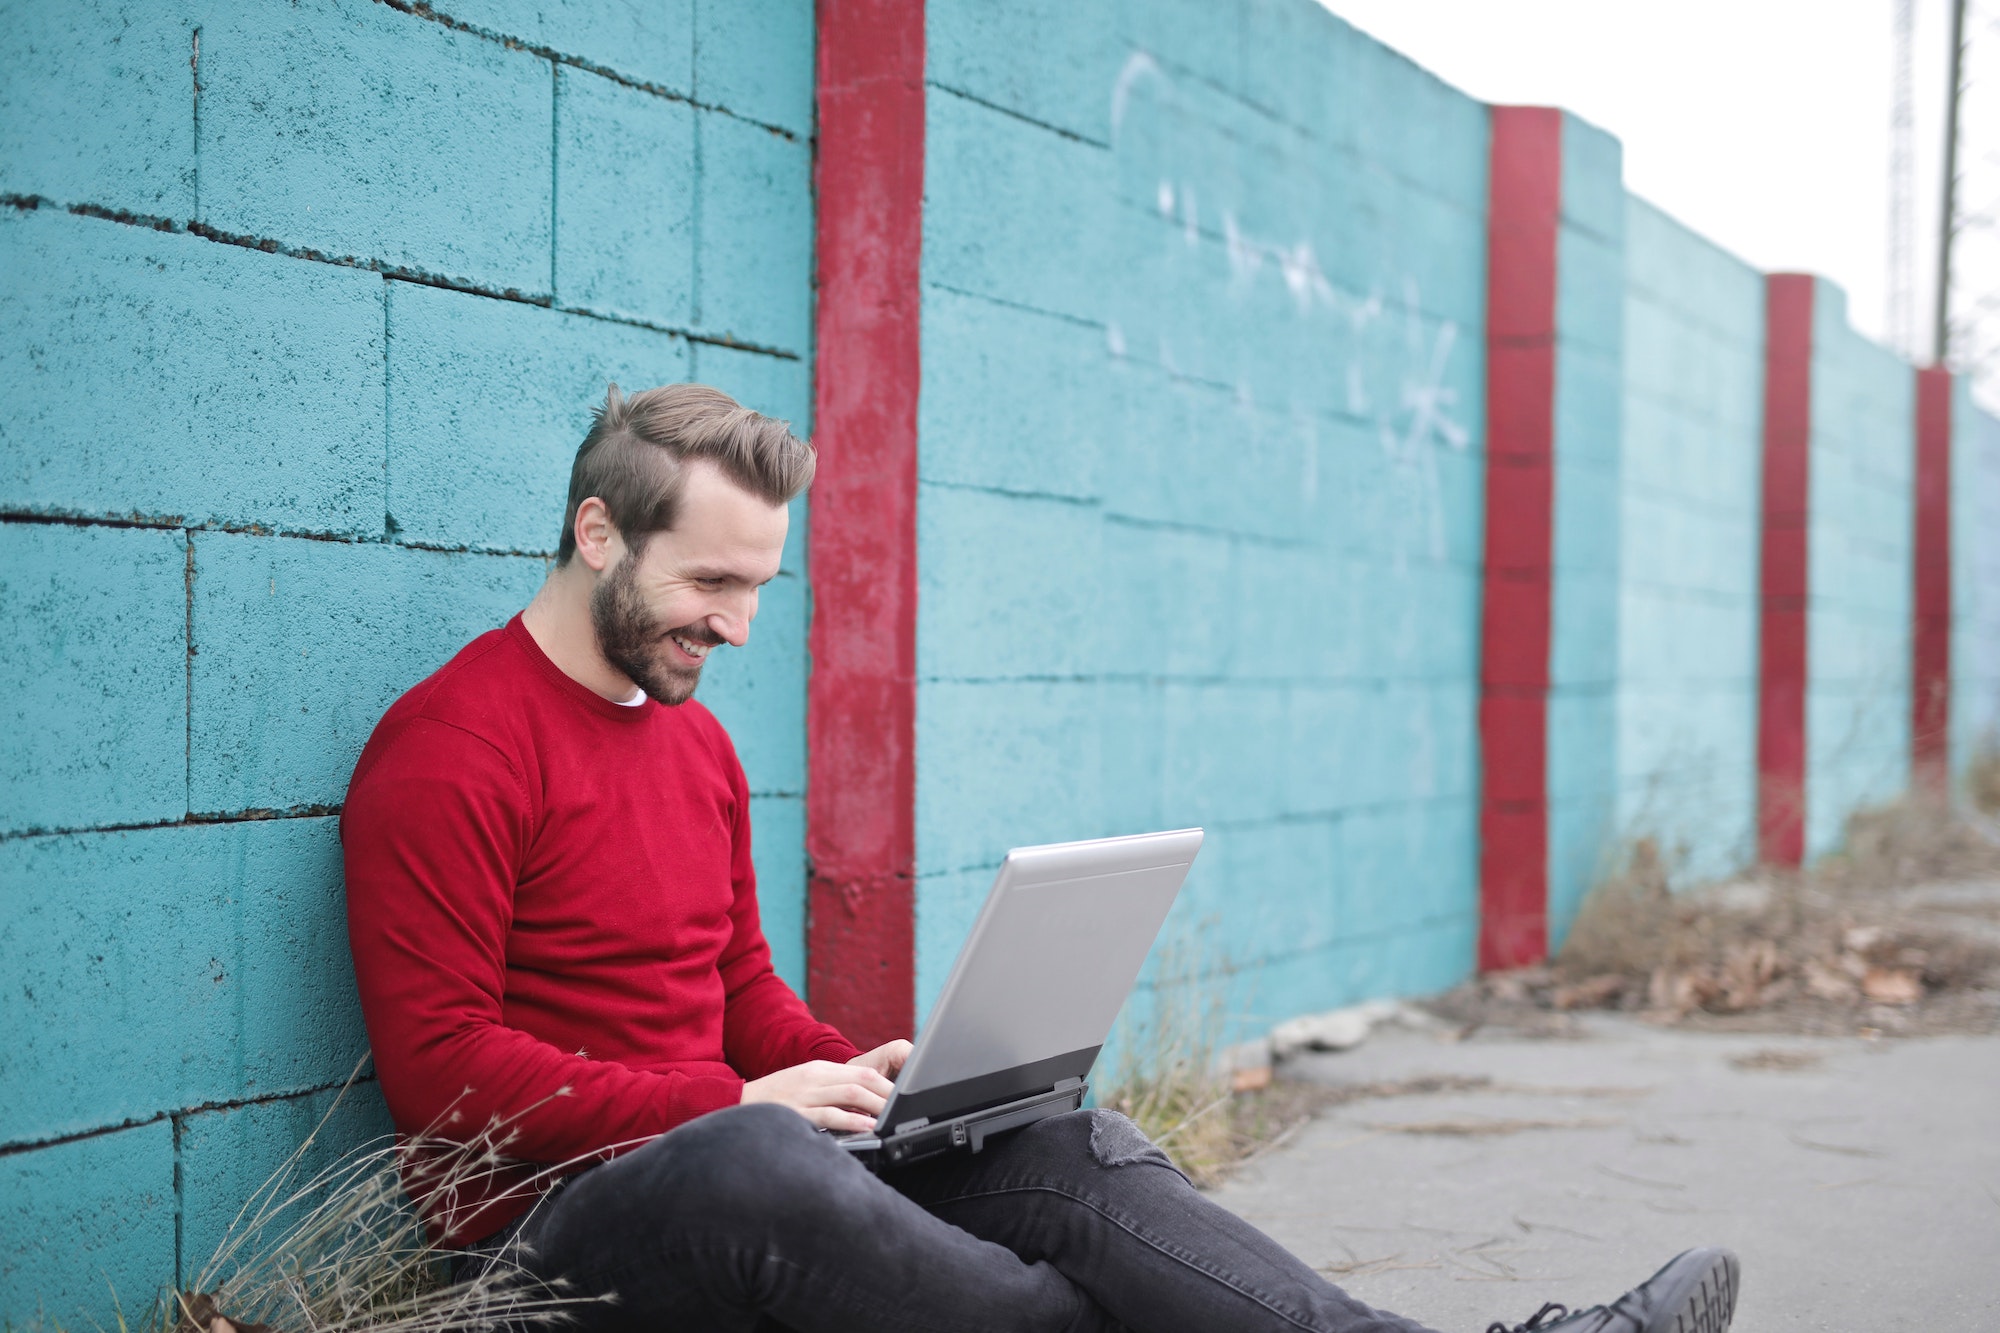 man leans against a blue wall outside and works at his laptop. he wears a long sleeved red shirt and is smiling down at the laptop